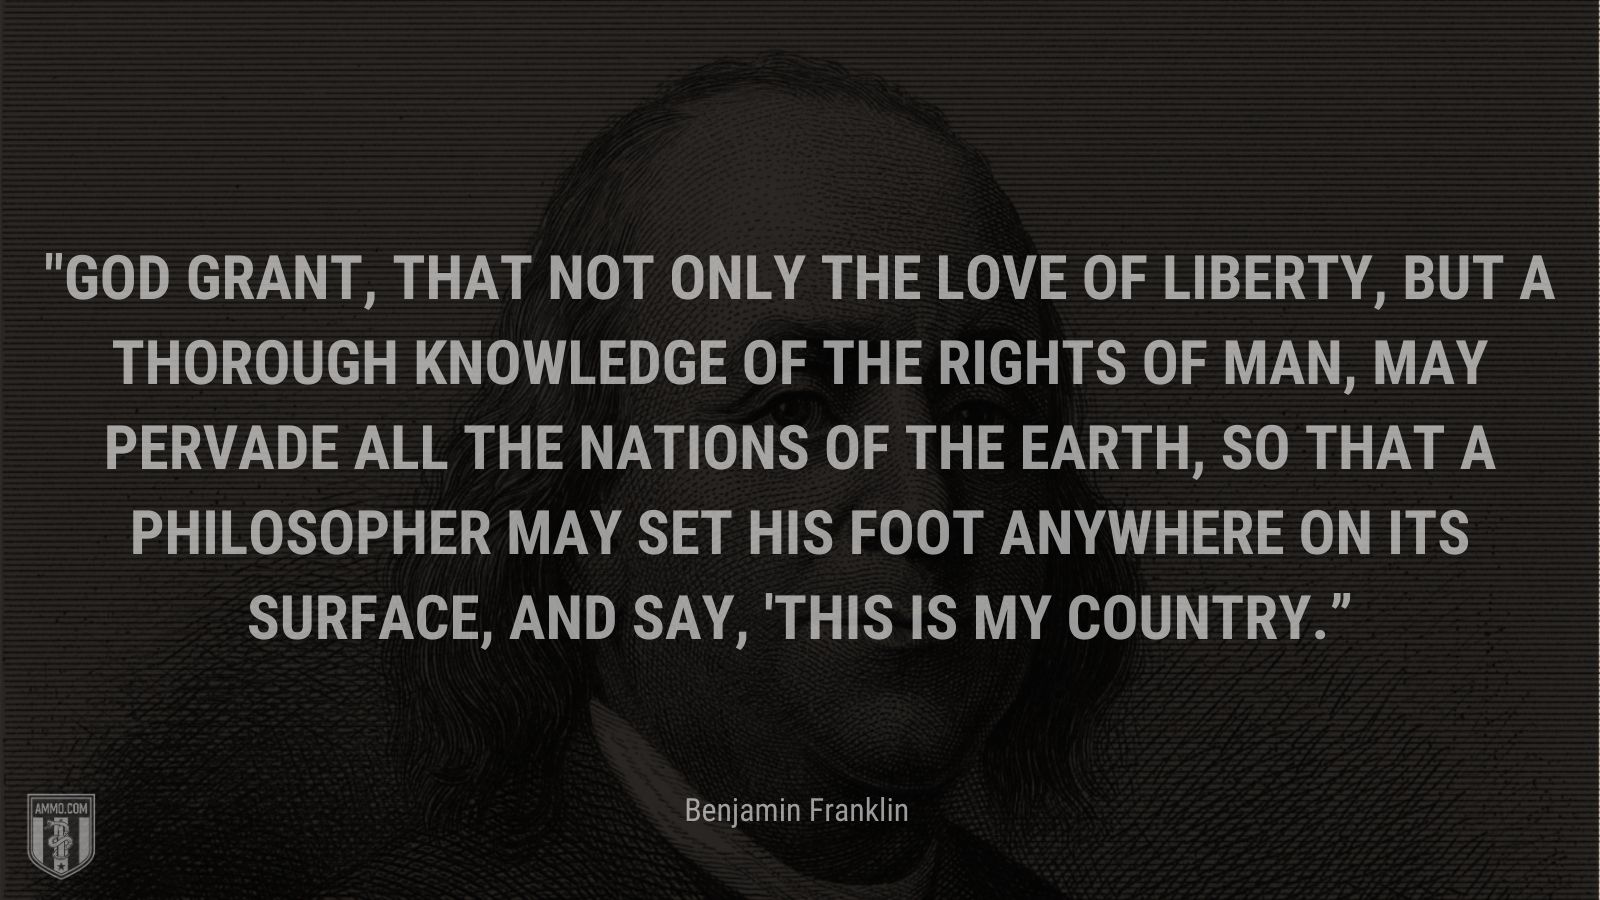 “God grant, that not only the Love of Liberty, but a thorough Knowledge of the Rights of Man, may pervade all the Nations of the Earth, so that a Philosopher may set his Foot anywhere on its Surface, and say, 'This is my Country.” - Benjamin Franklin